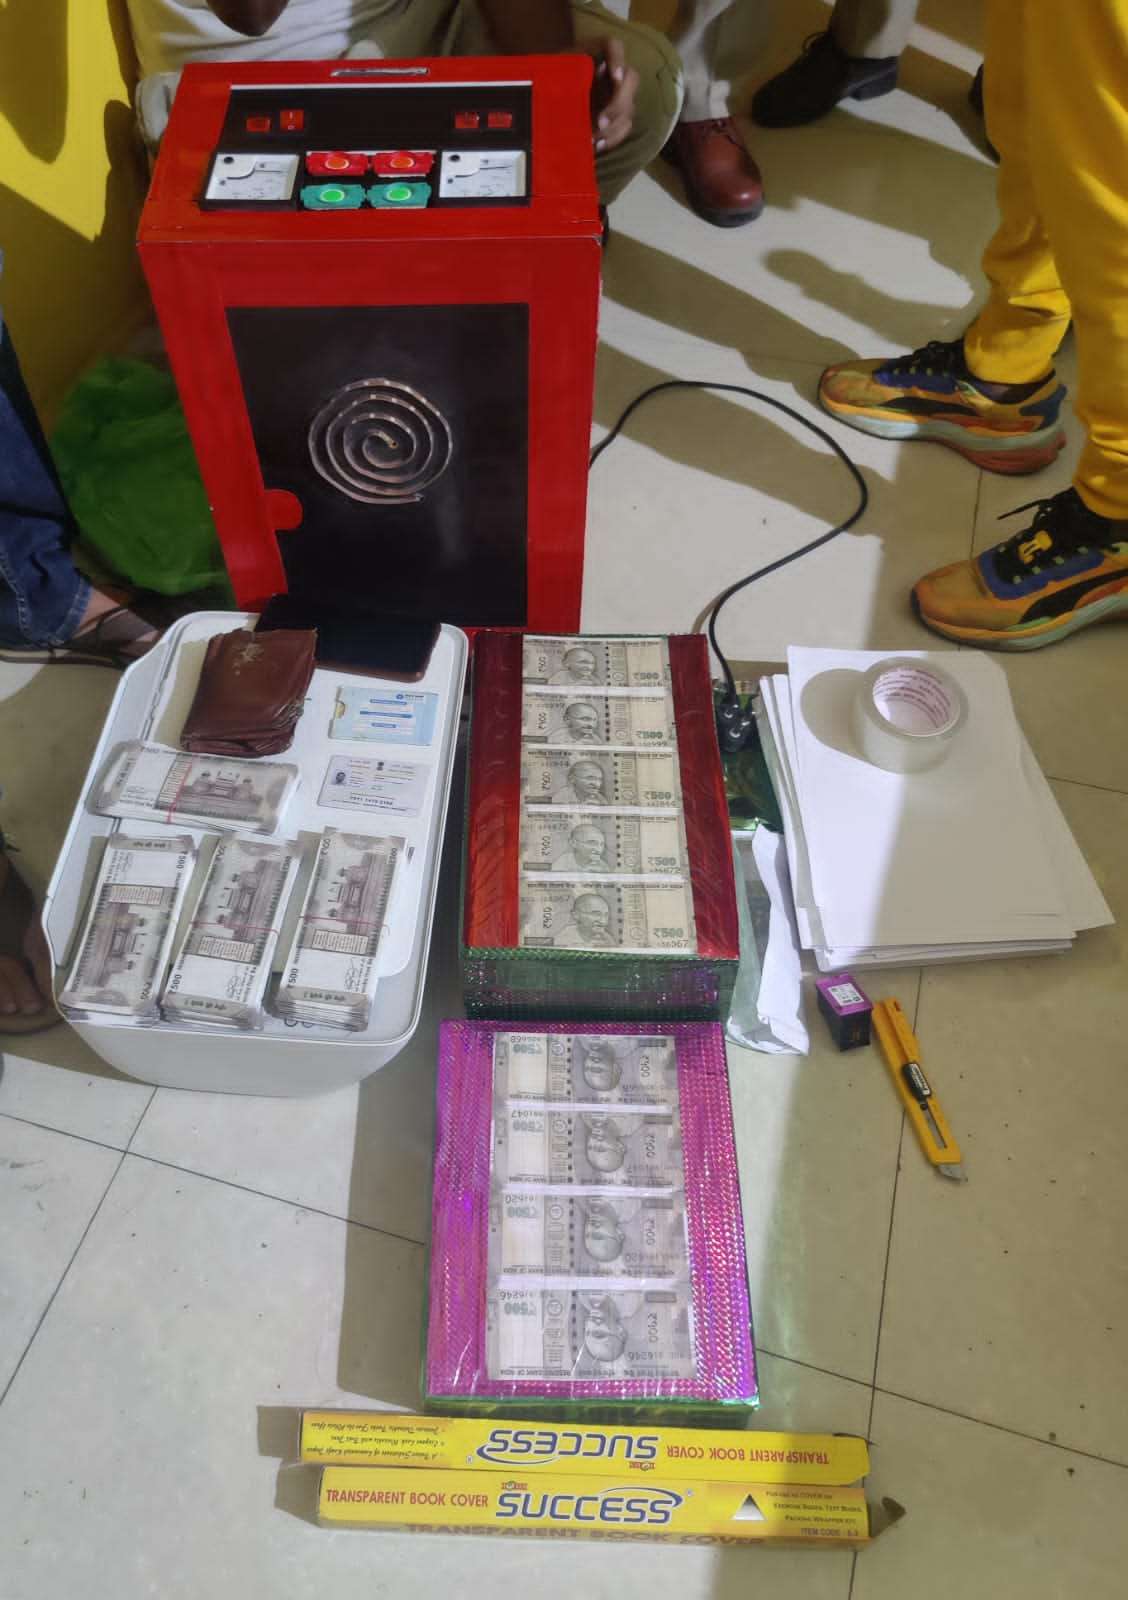 In a major crackdown against Fake Indian Curency Notes (FICN), the Special Task Force of Assam police on Tuesday conducted a raid at Basistha area in Guwahati and recovered FICN of 280 numbers of Rs 500 notes.